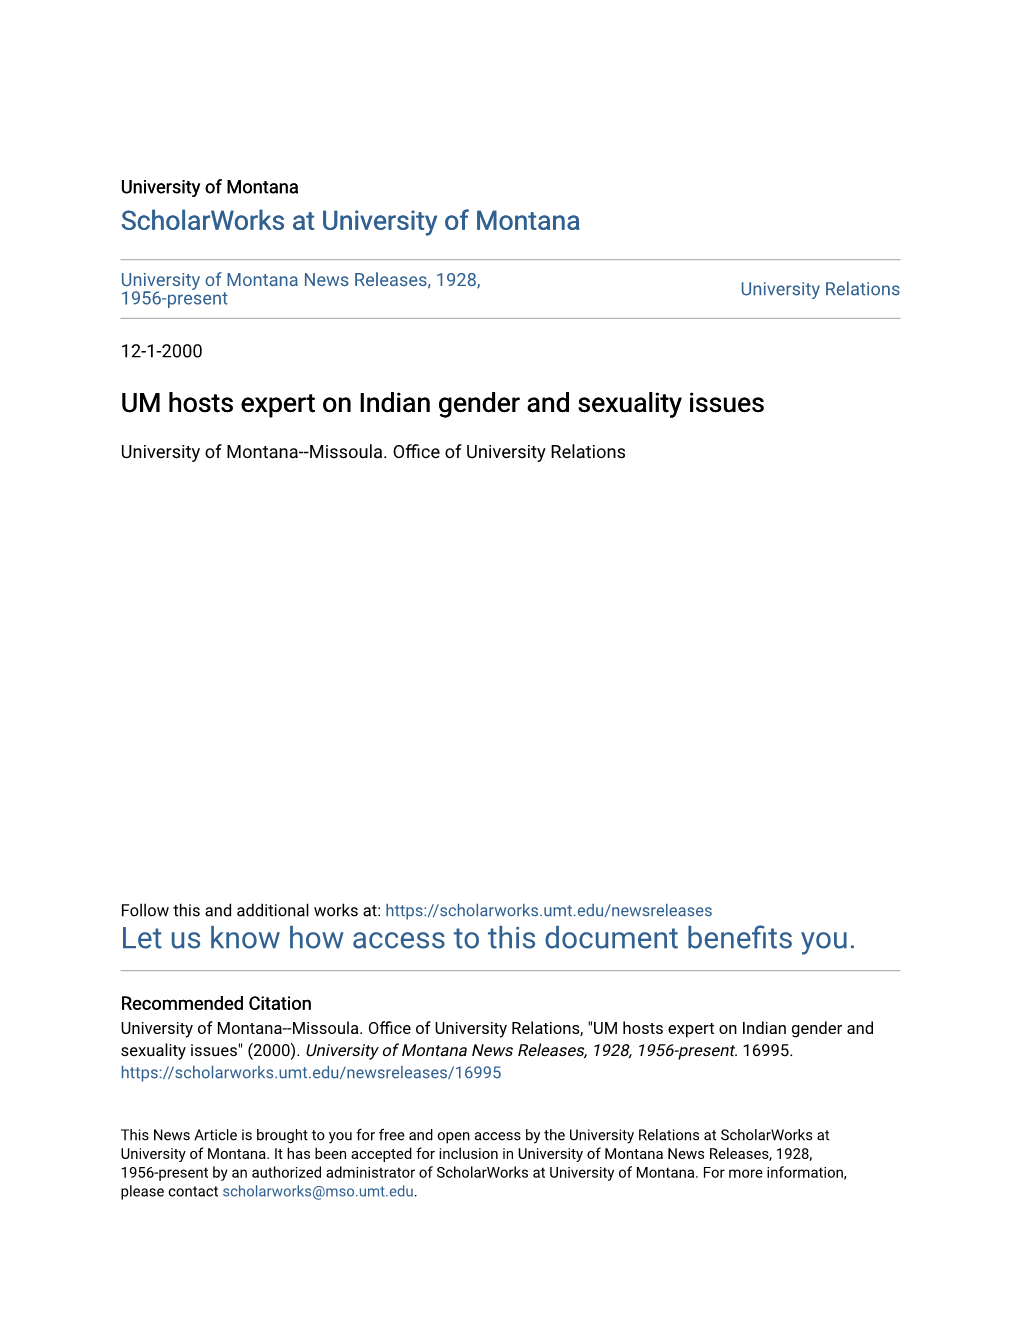 UM Hosts Expert on Indian Gender and Sexuality Issues